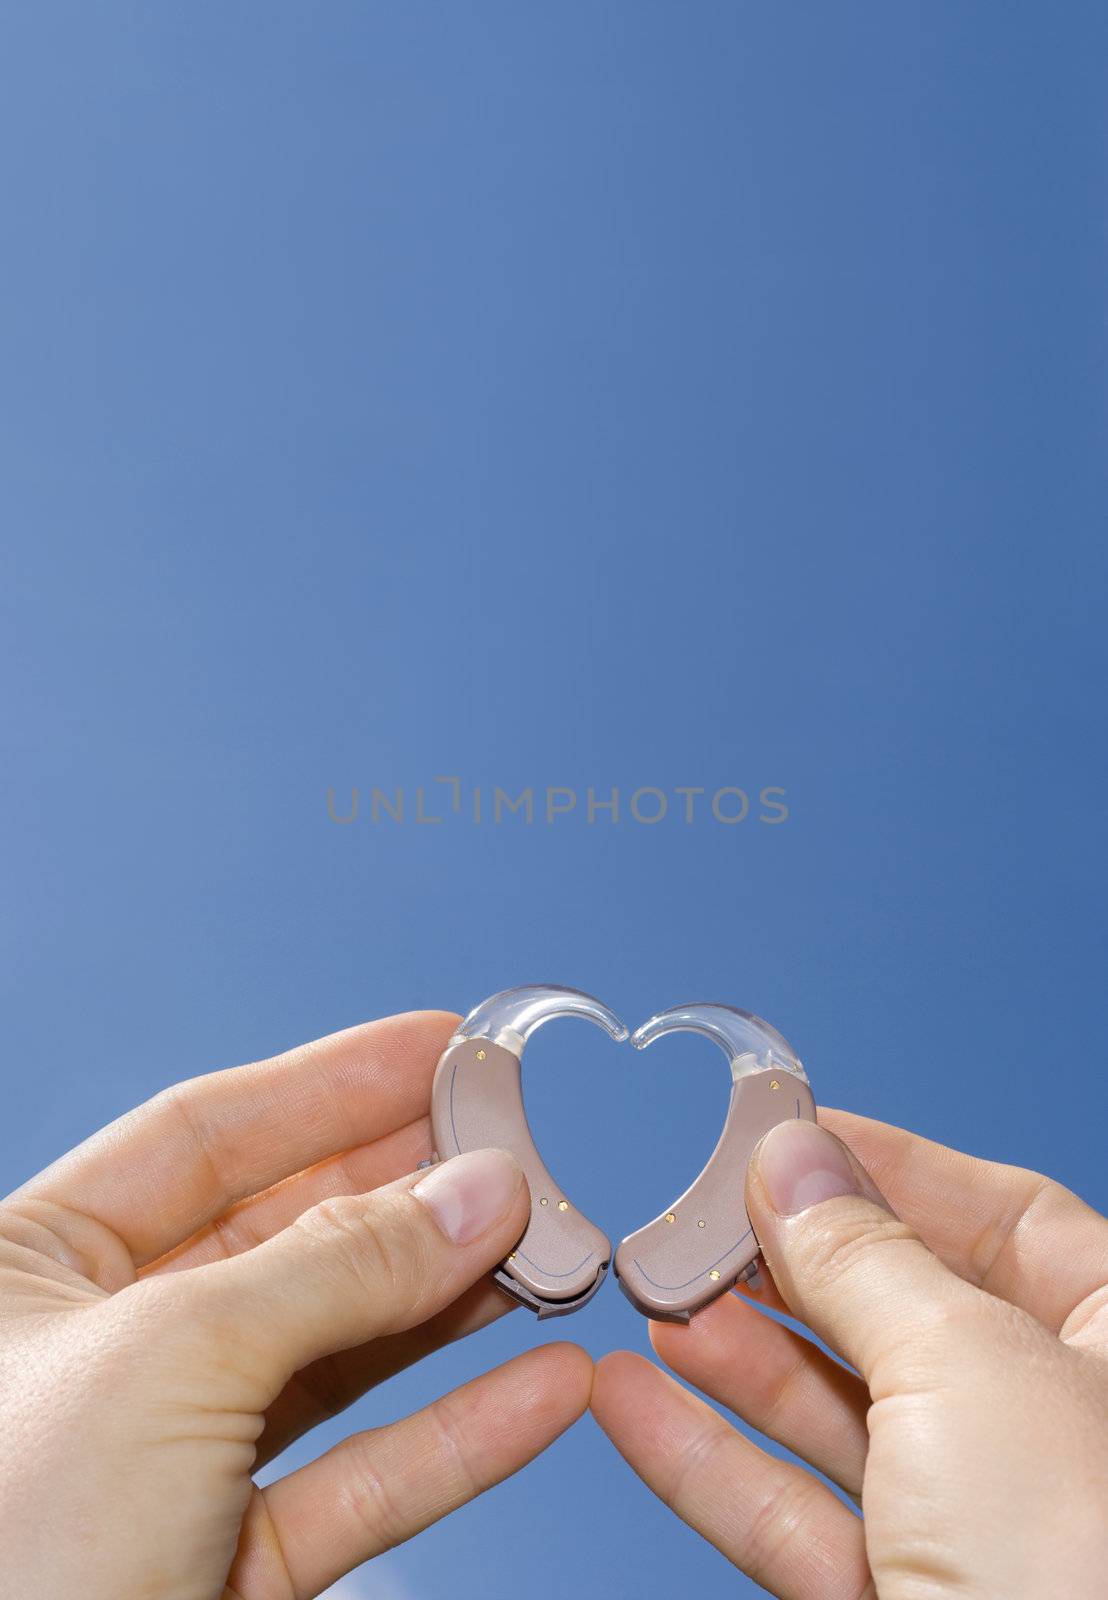 Hands showing a heart shape from digital hearing aids in fron of a blue sky background useful for text